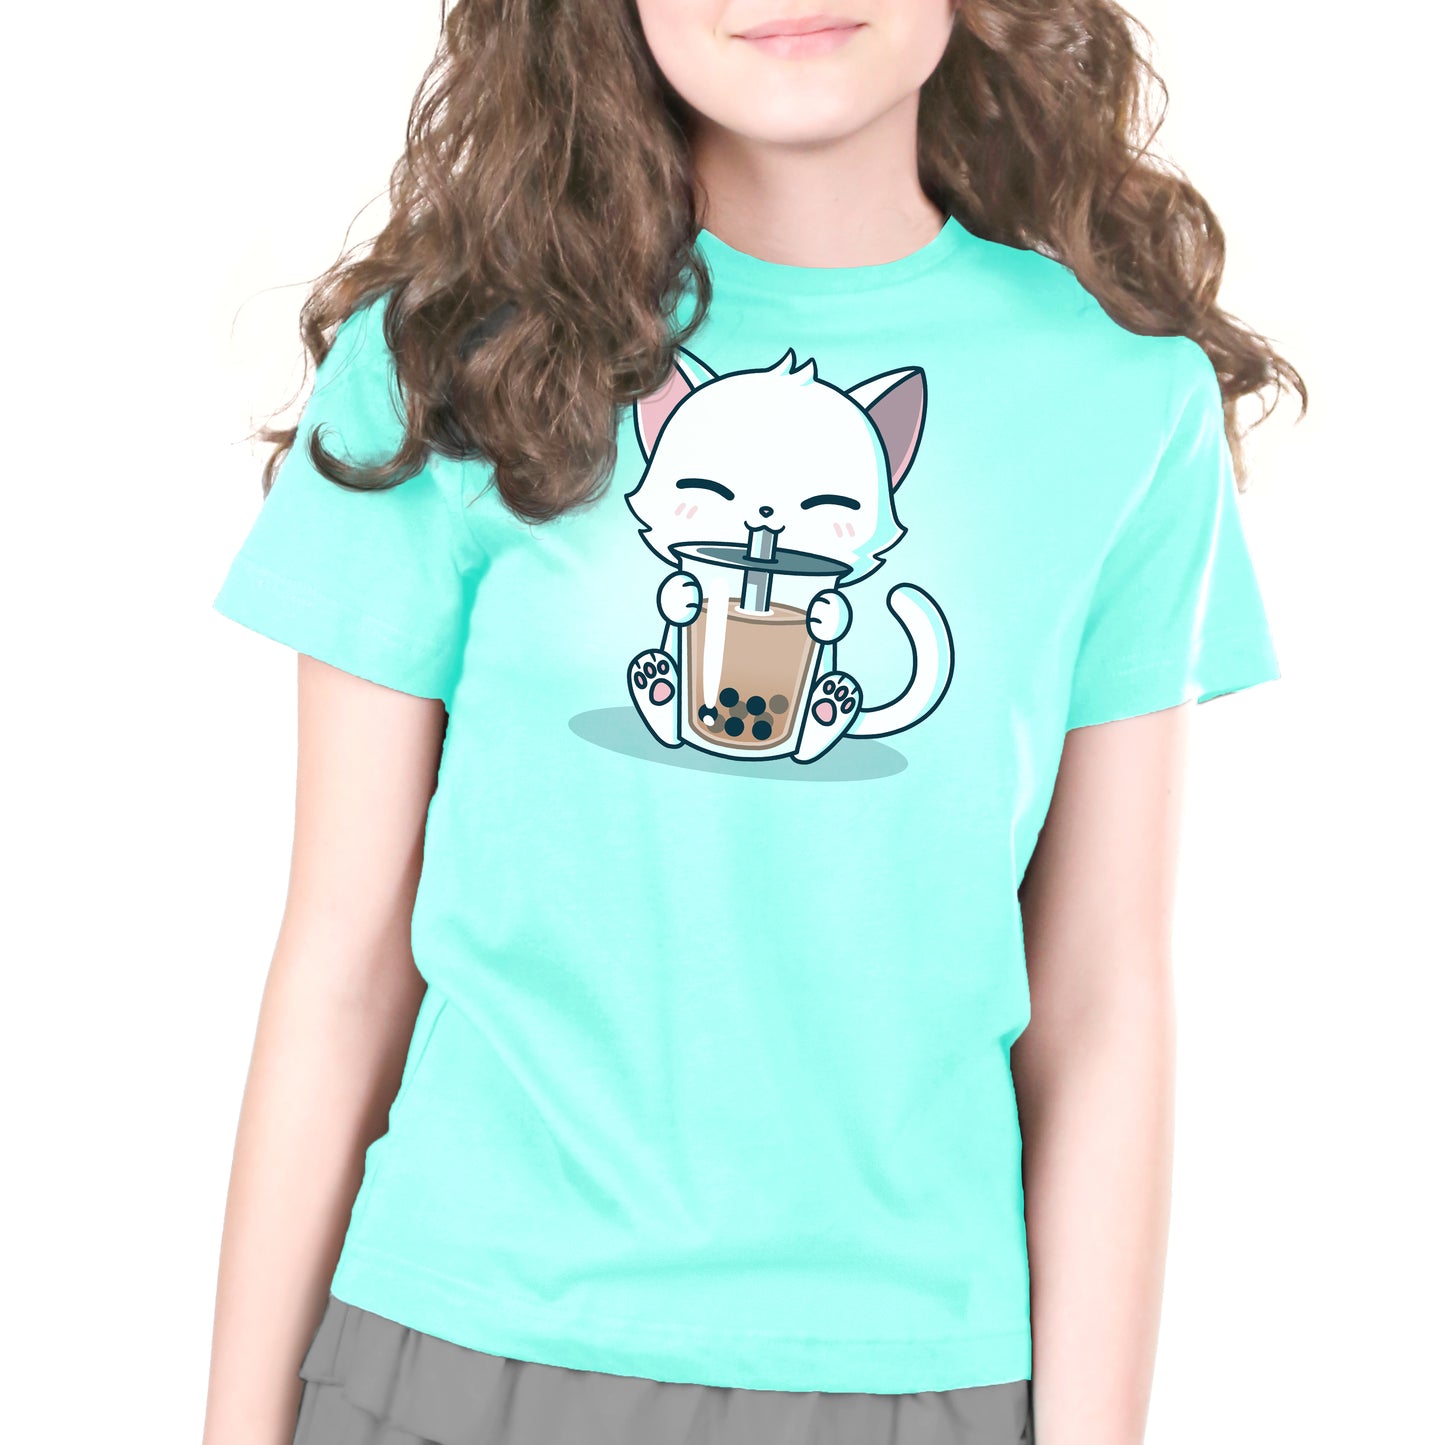 A girl wearing a "Boba Cat" t-shirt by TeeTurtle with a cartoon cat holding a cup of boba.